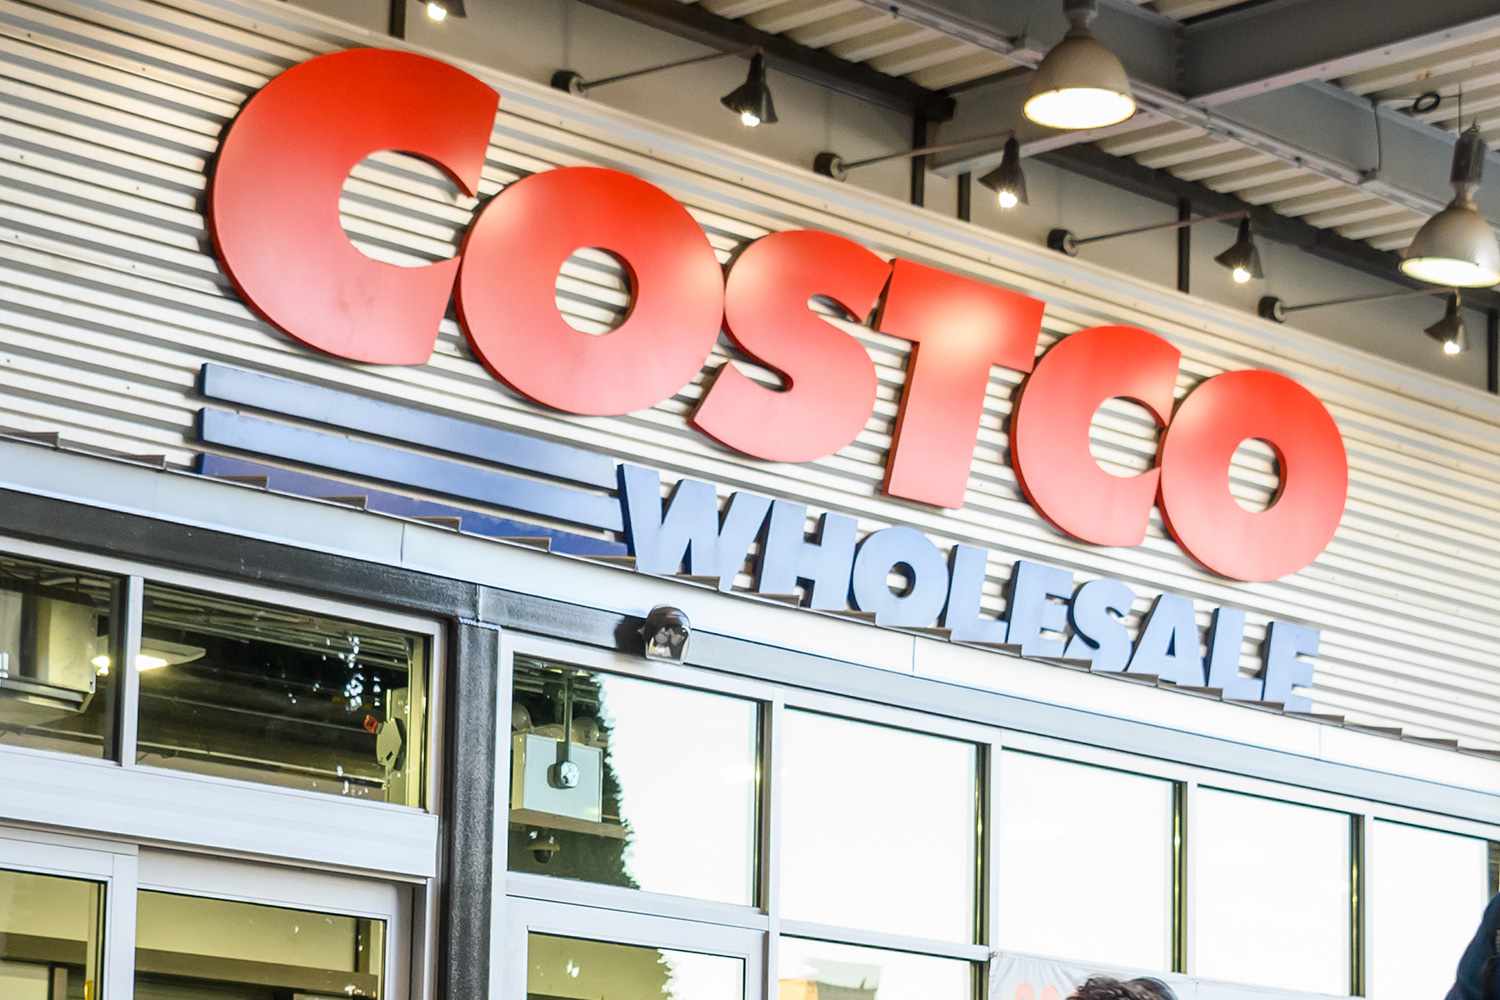 Costco Wholesale in East Harlem on November 24, 2020 ニューヨーク市で